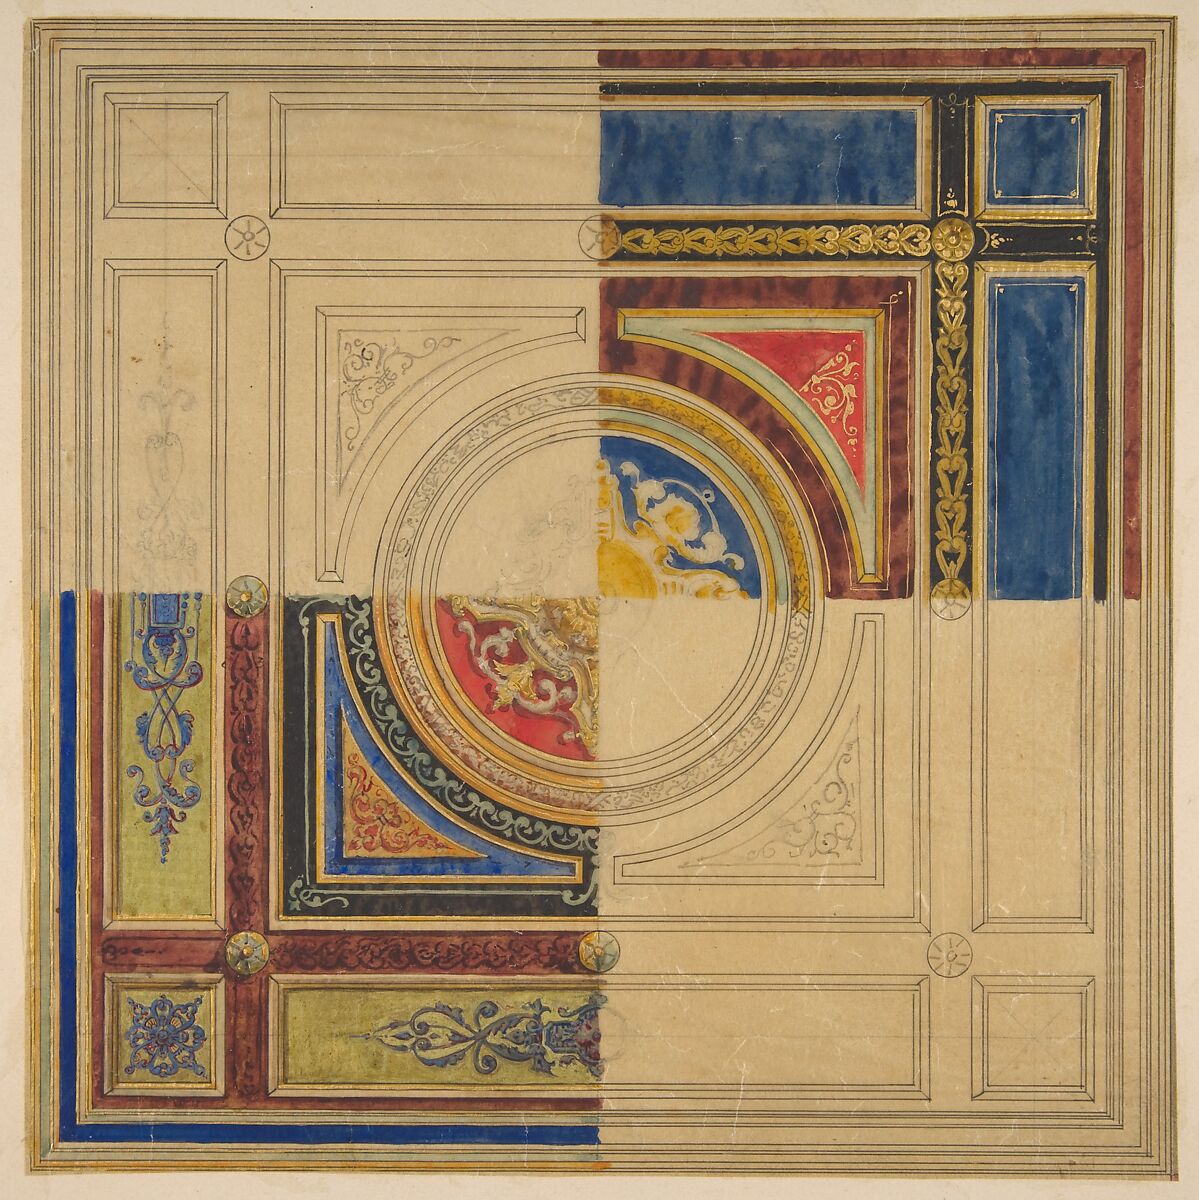 Design for a paneled ceiling with alternative decorations, Jules-Edmond-Charles Lachaise (French, died 1897), pen and ink, watercolor, and gold paint on tracing paper, glued on to wove paper 